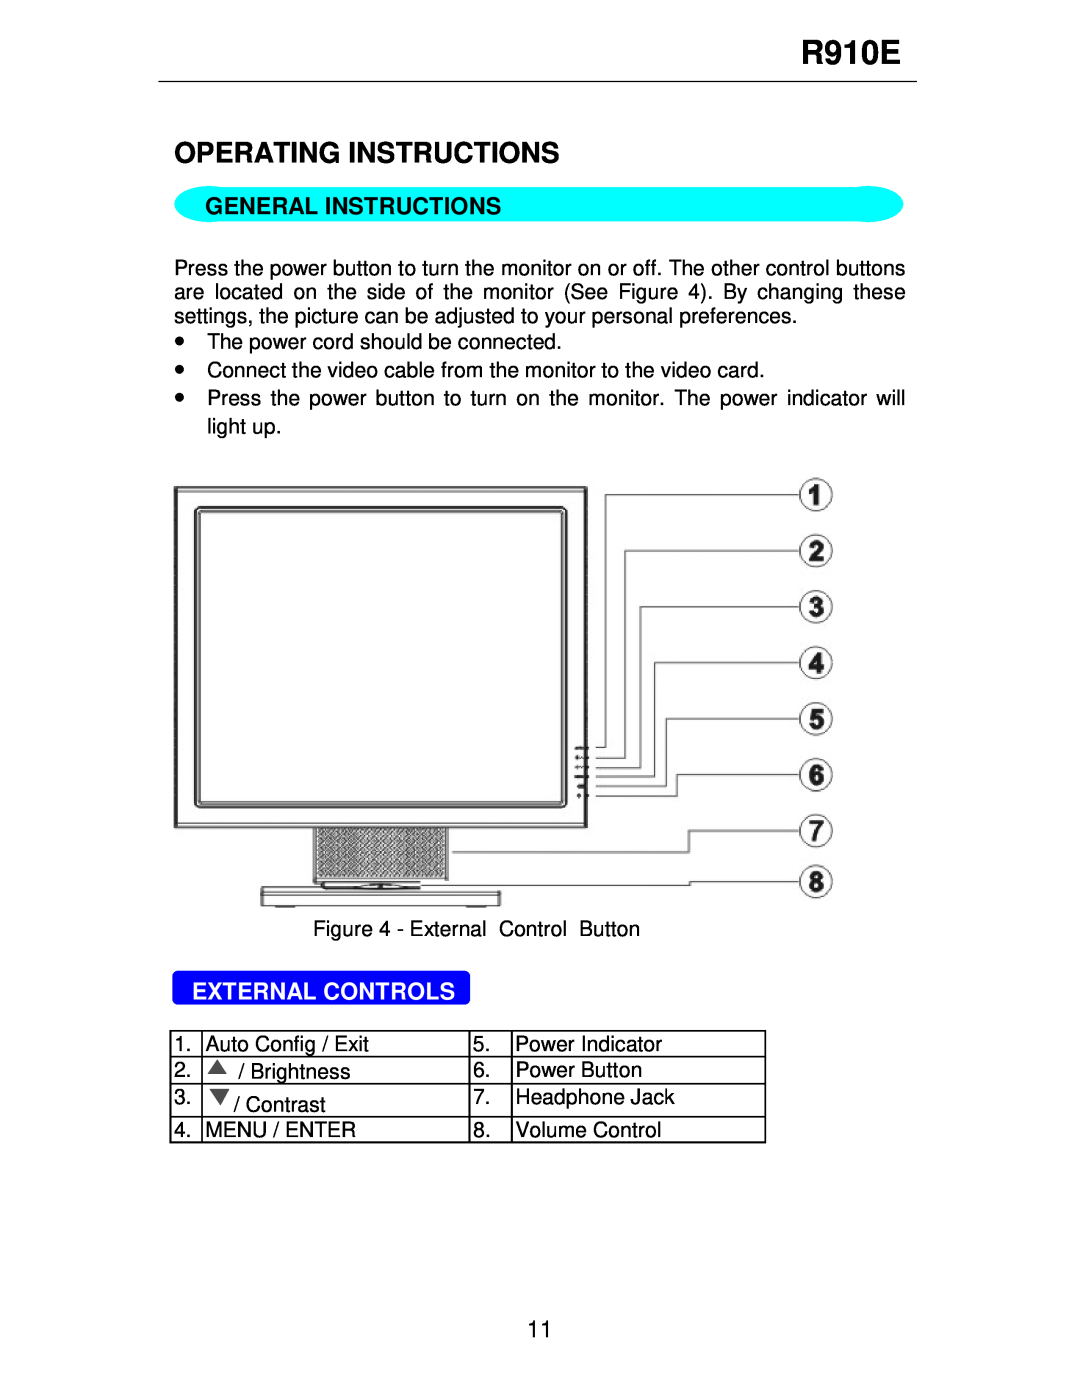 Rosewill R910E user manual Operating Instructions, General Instructions, External Controls 